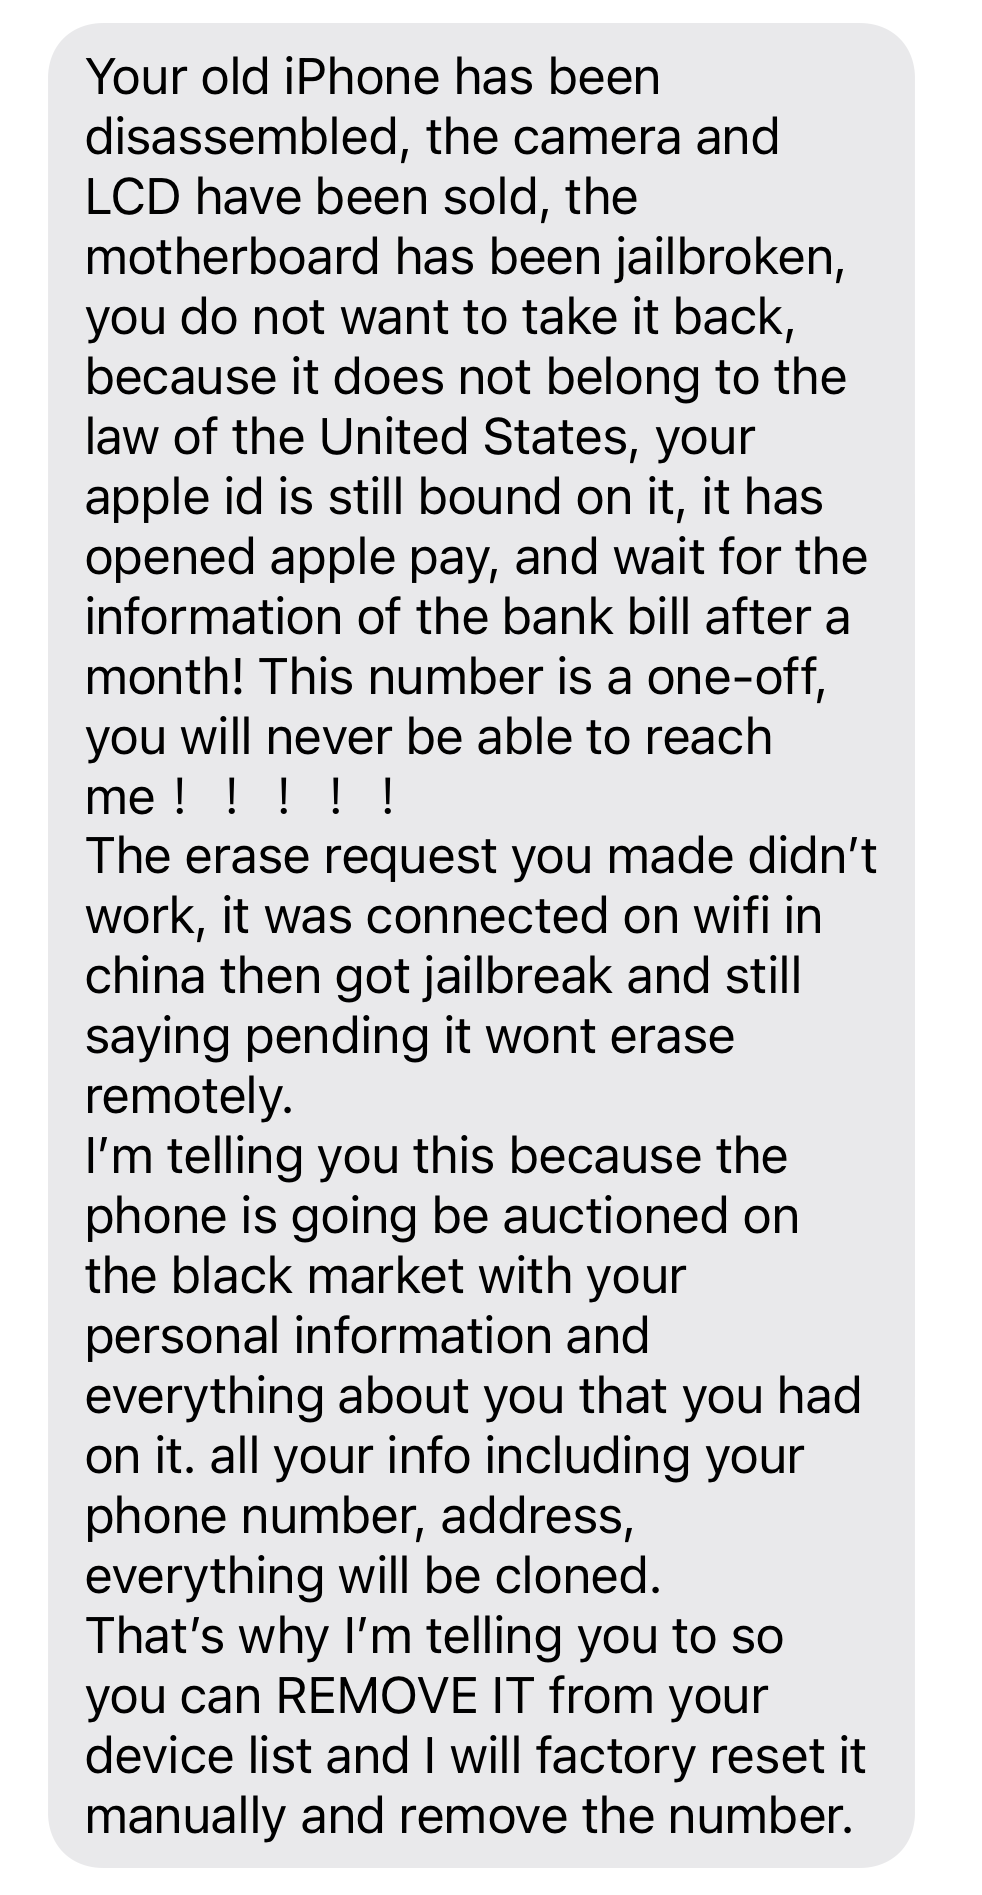 5) “Your old iPhone has been disassembled, the camera and LCD have been sold, the motherboard has been jailbroken, you do not want to take it back, because it does not belong to the law of the United States. Your apple id is still bound on it, it has opened apple pay, and wait for the information of the bank bill after a month! This number is a one-off, you will never be able to reach me ！！！！！”